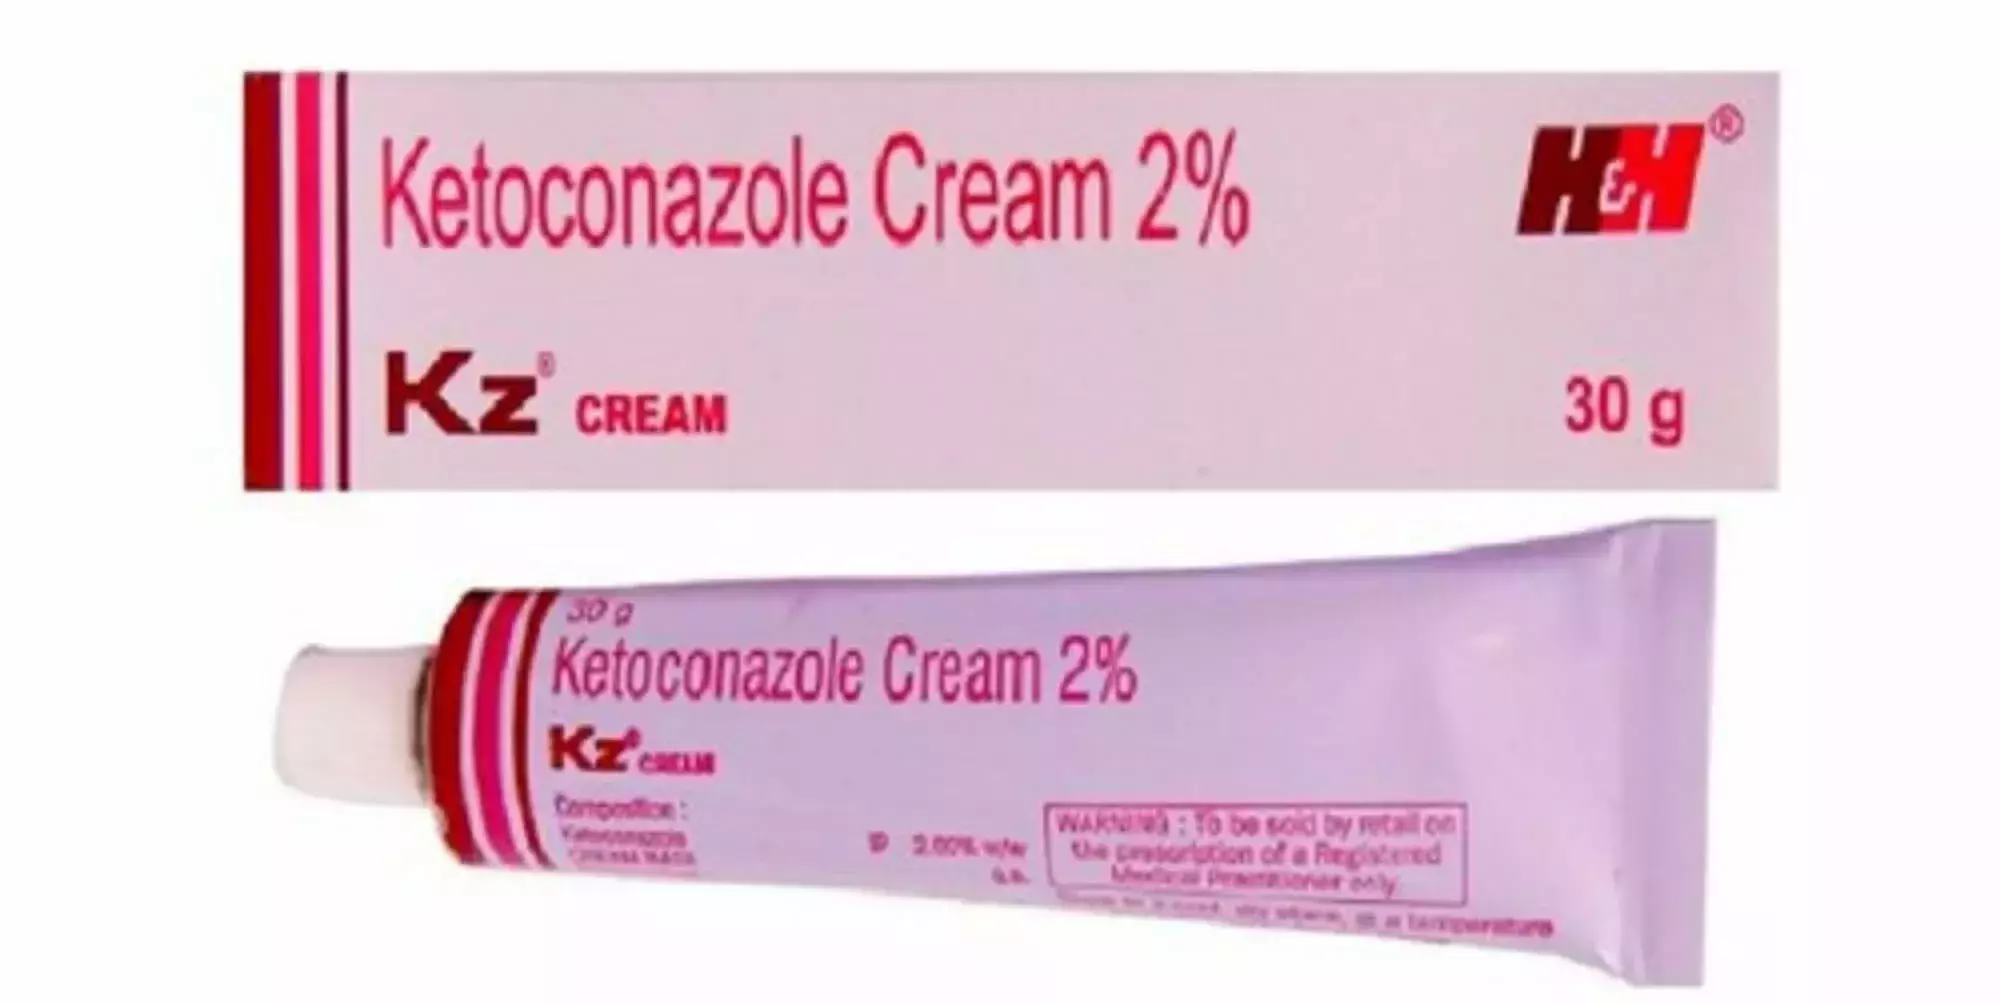 Ketoconazole - best cream for fungal infections